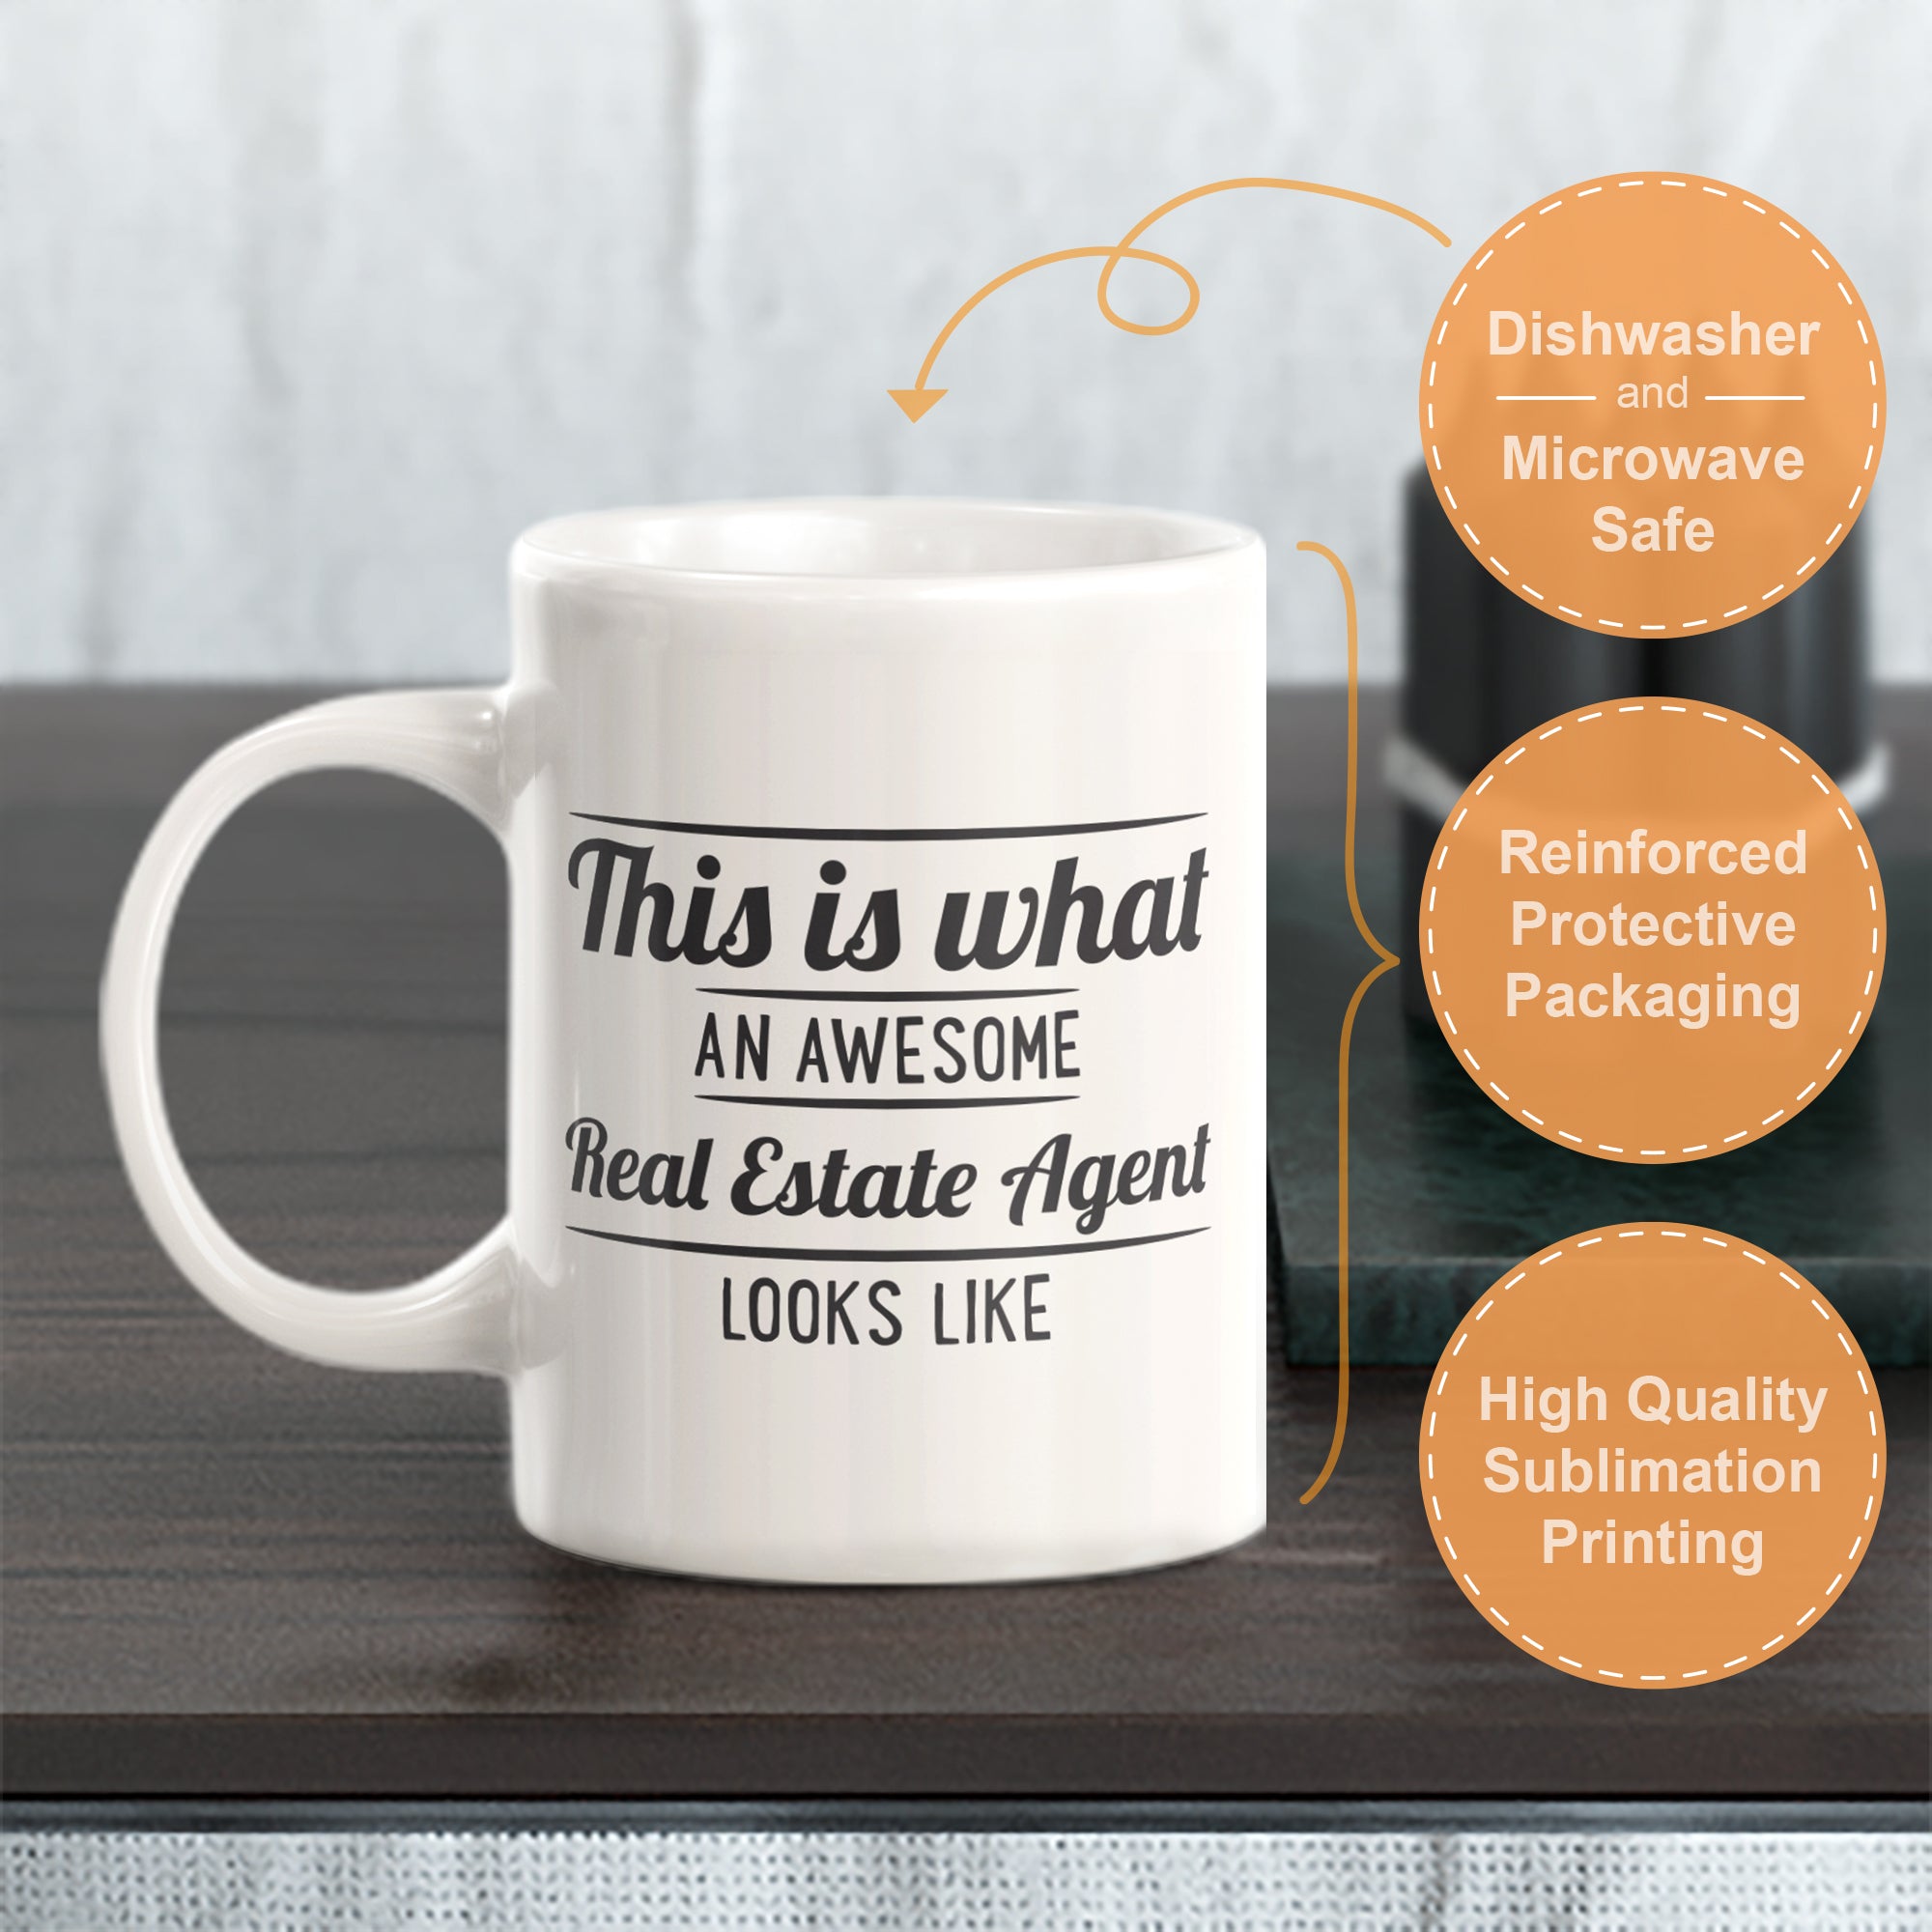 This is what an awesome real estate agent looks like Coffee Mug